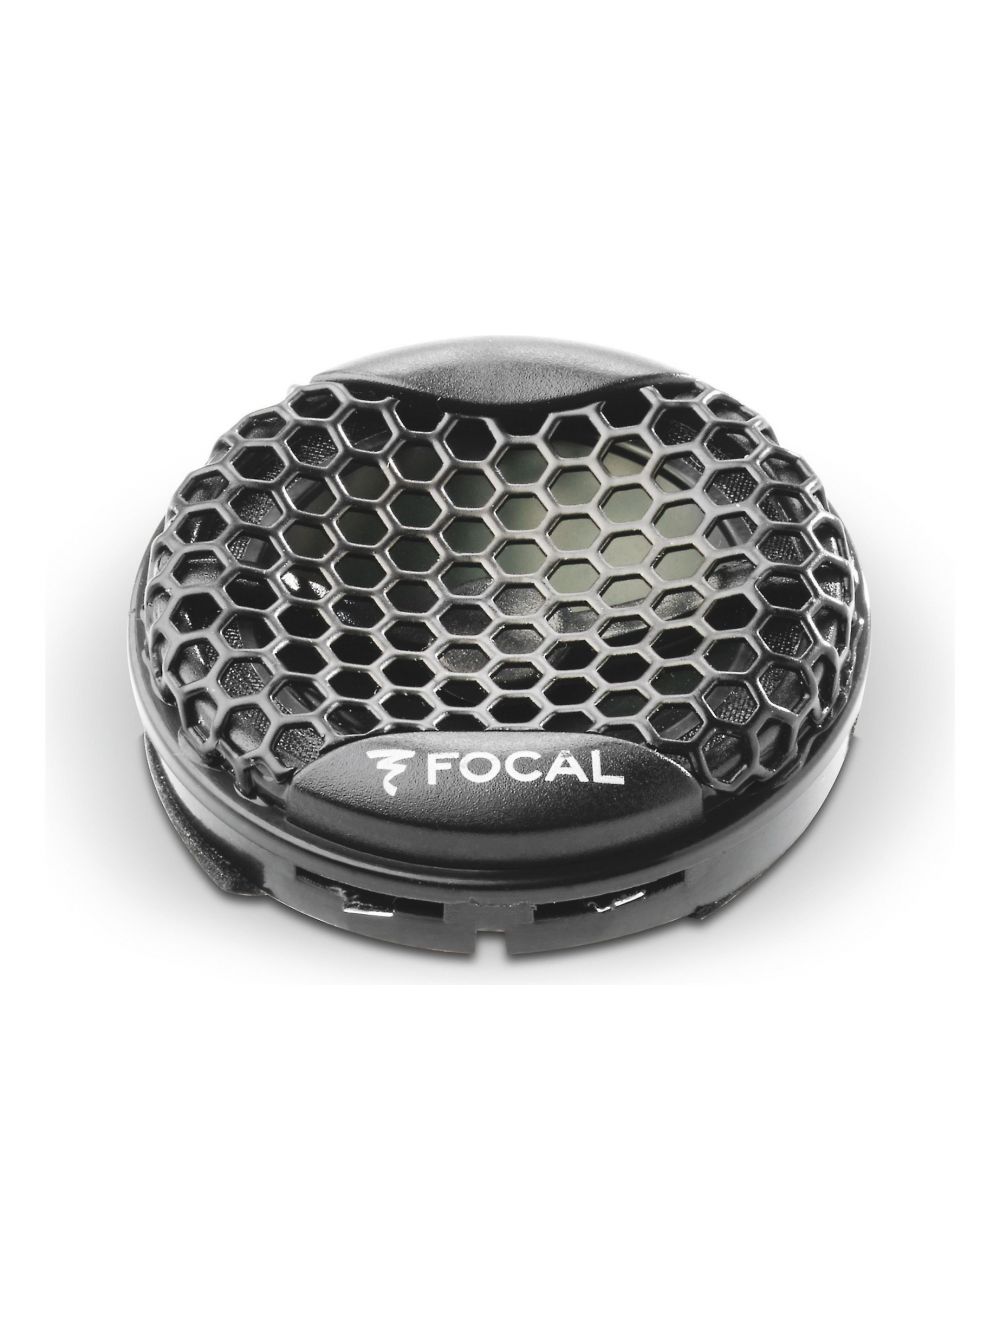 Focal 165 AS 3 6.5 3-way component kit, RMS: 80W - MAX: 160W